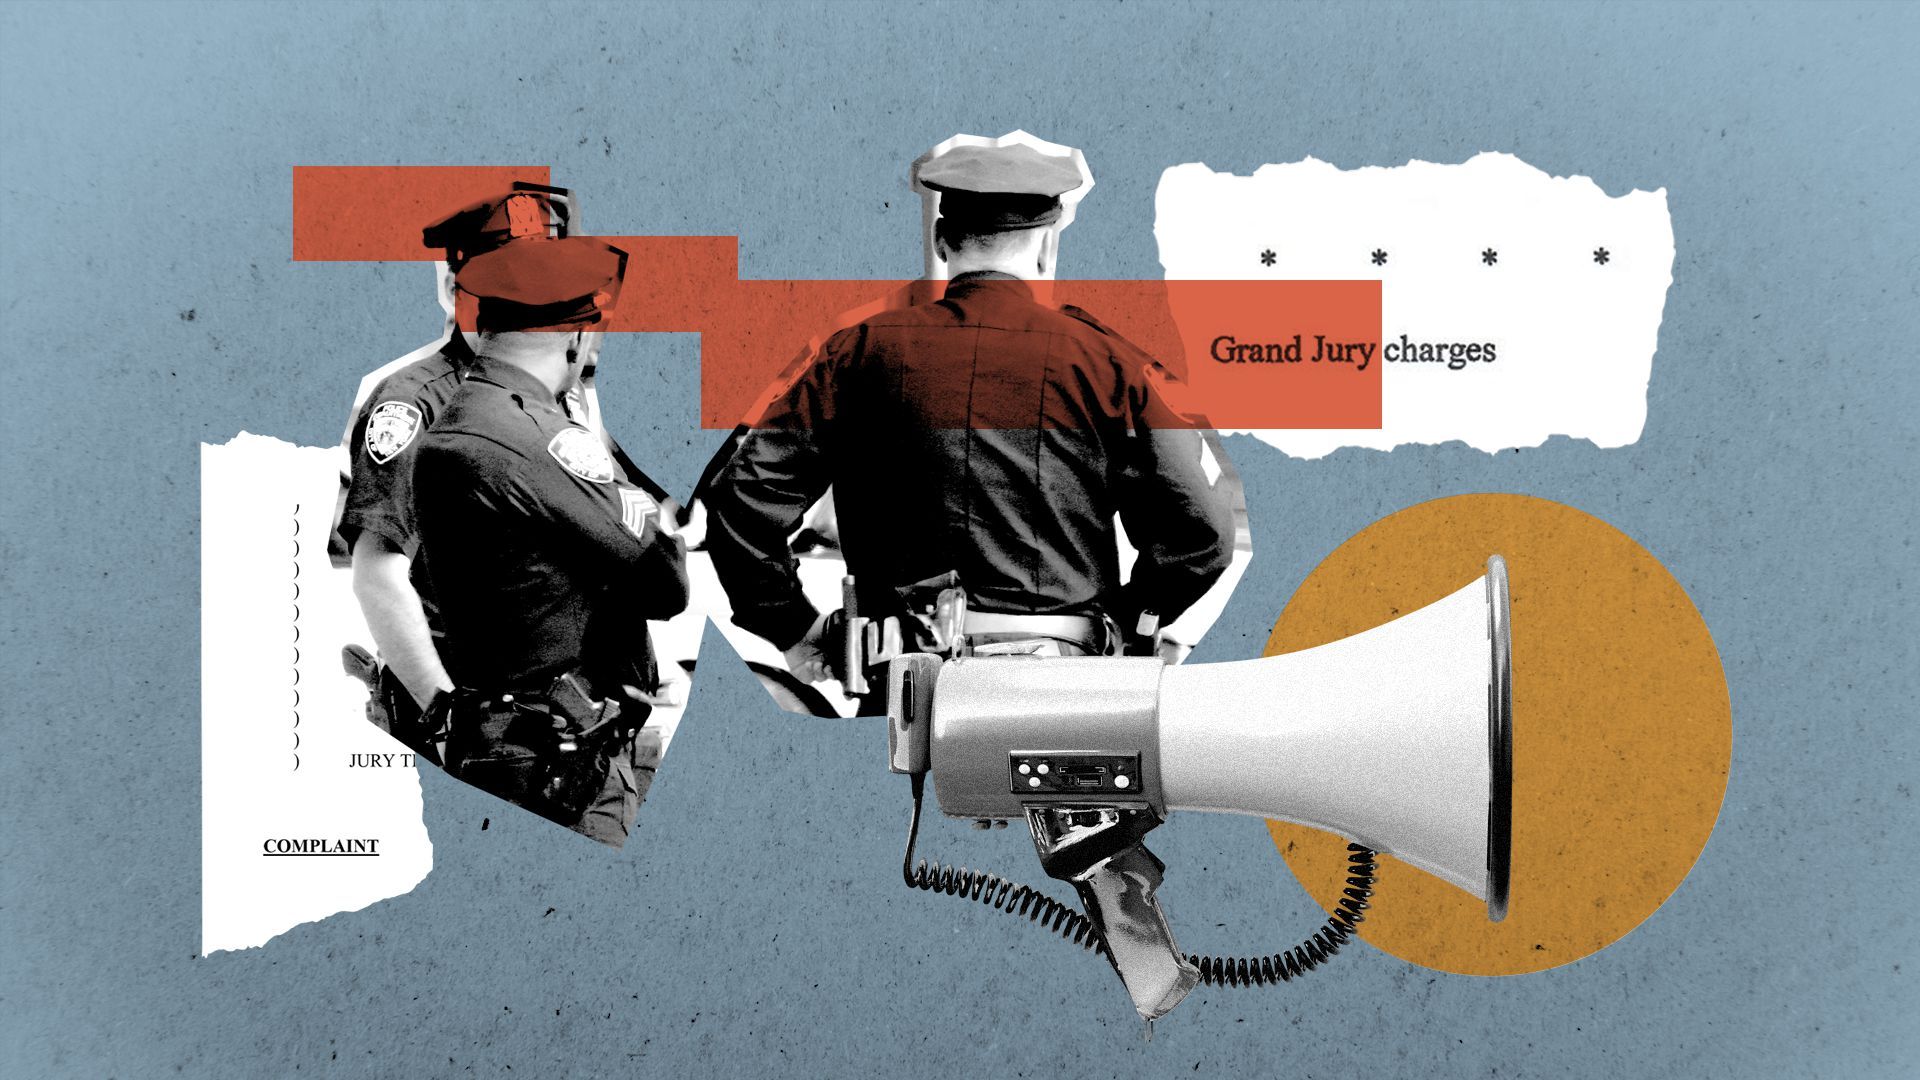 Illustration of a collage featuring police officers, a megaphone, and torn pieces of legal documents.